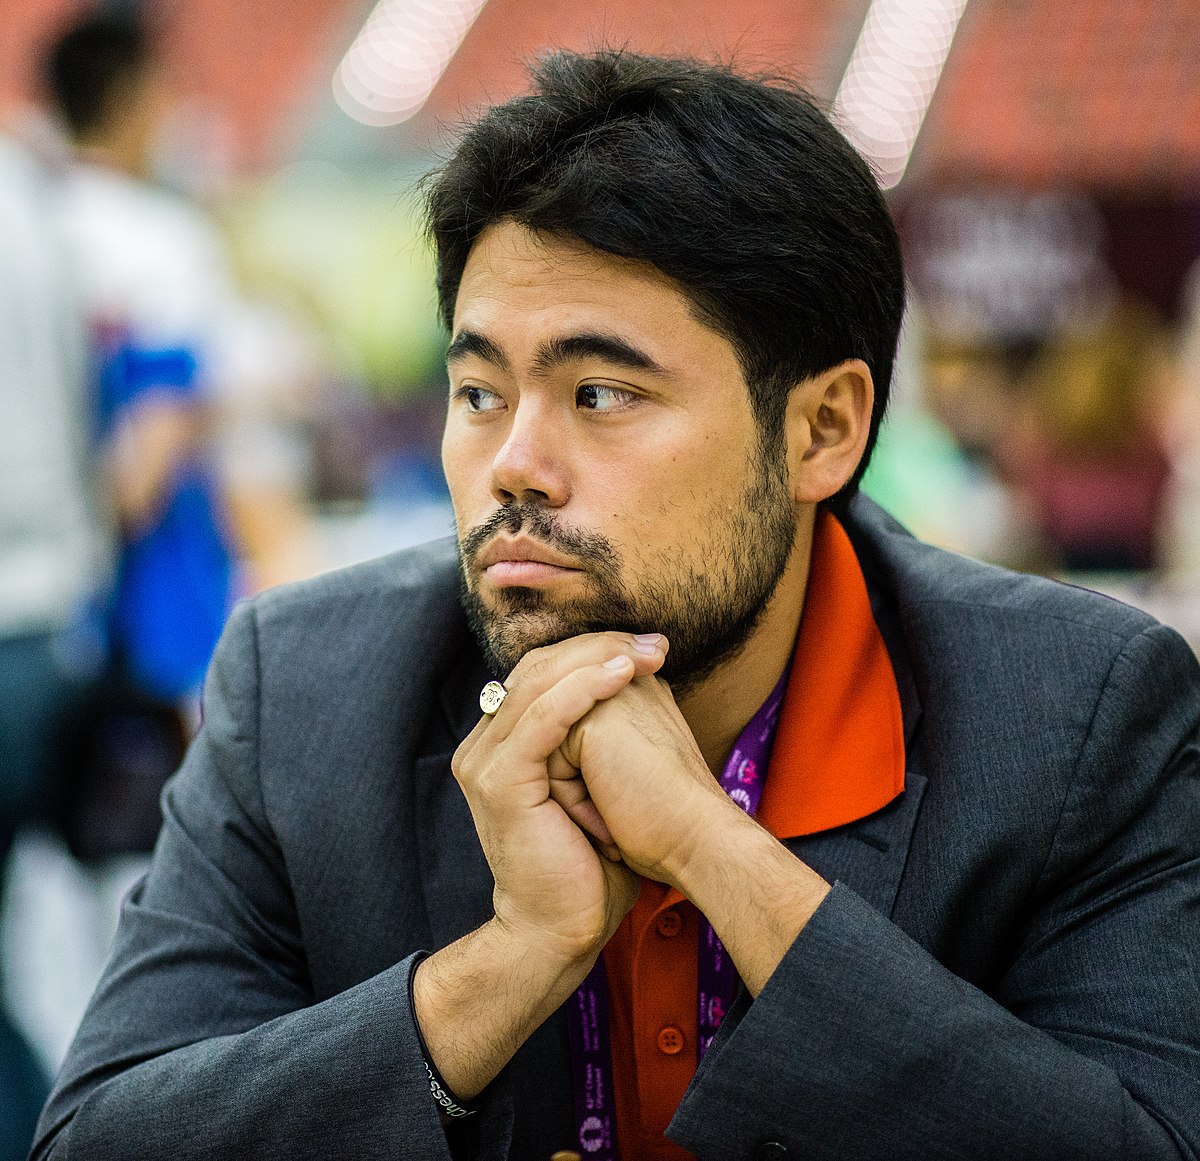 A union made in the world of 64 squares: Hikaru Nakamura and